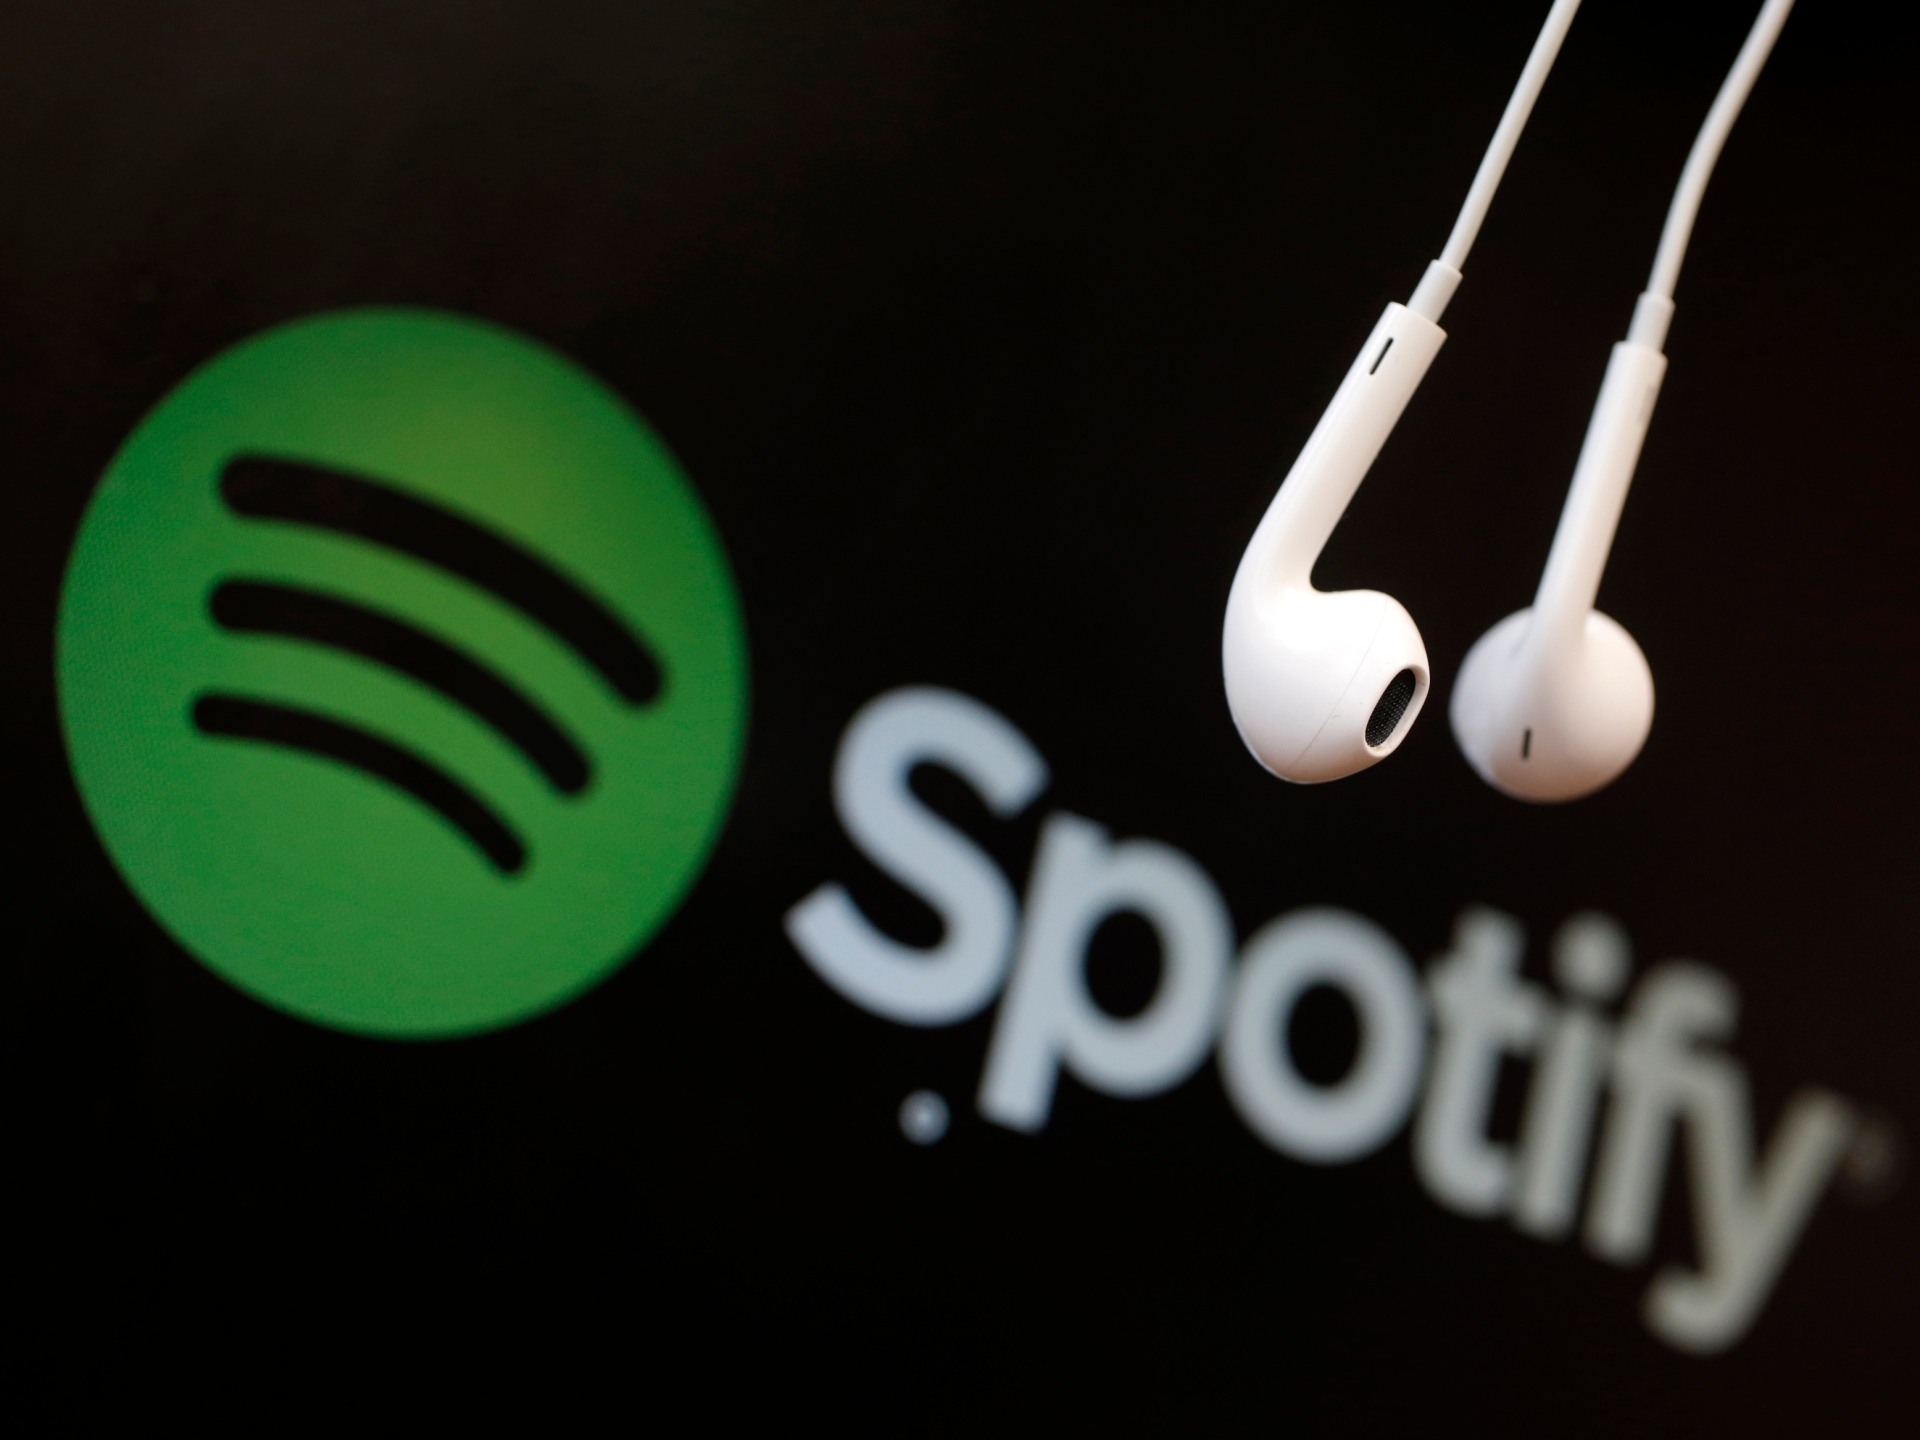 spotify-to-announce-layoffs-as-soon-as-this-week:-bloomberg